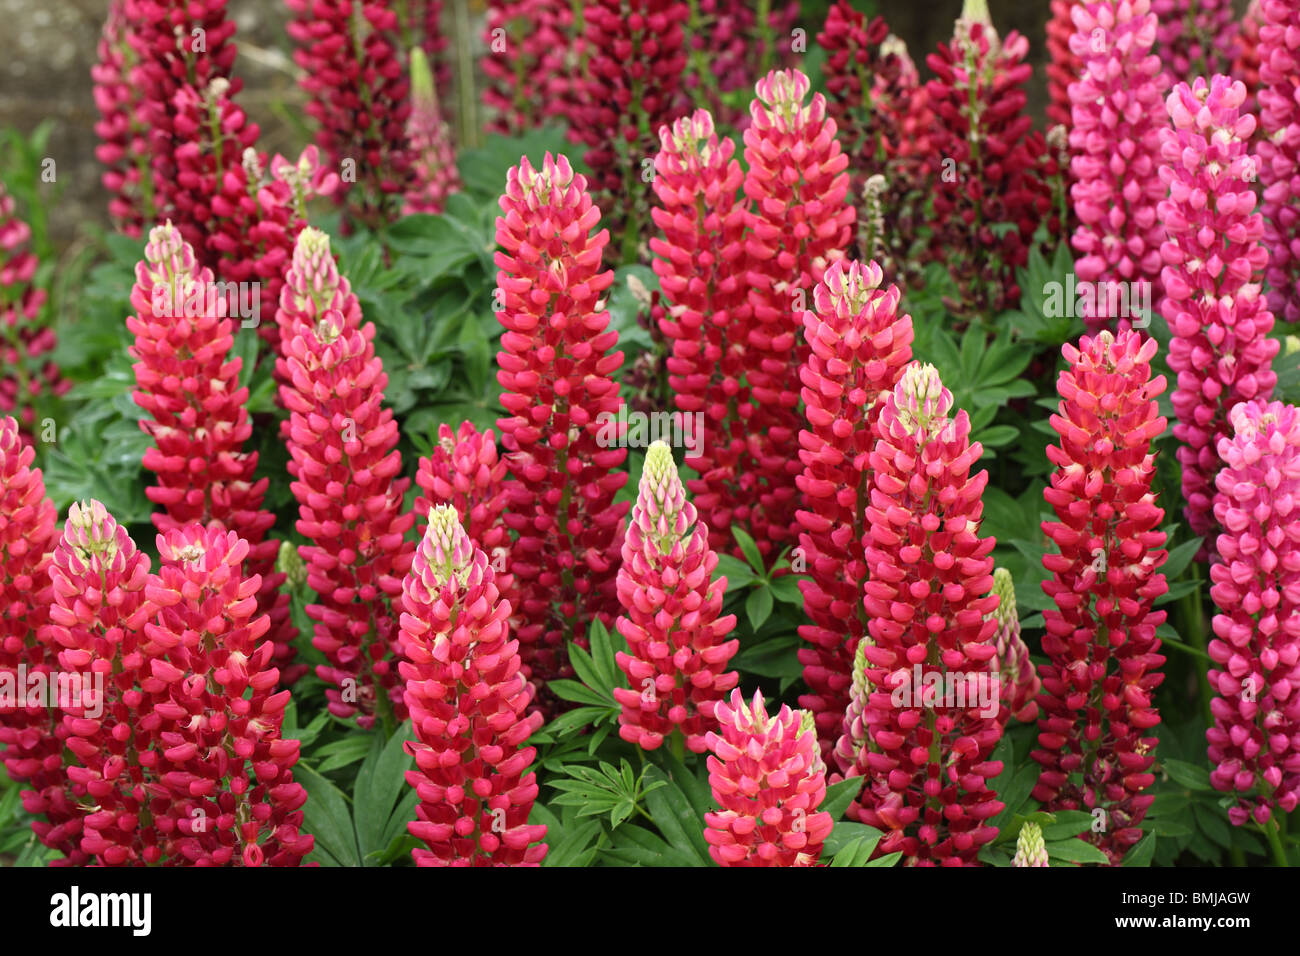 Colourful display of red/pink lupins in an English garden border Stock Photo